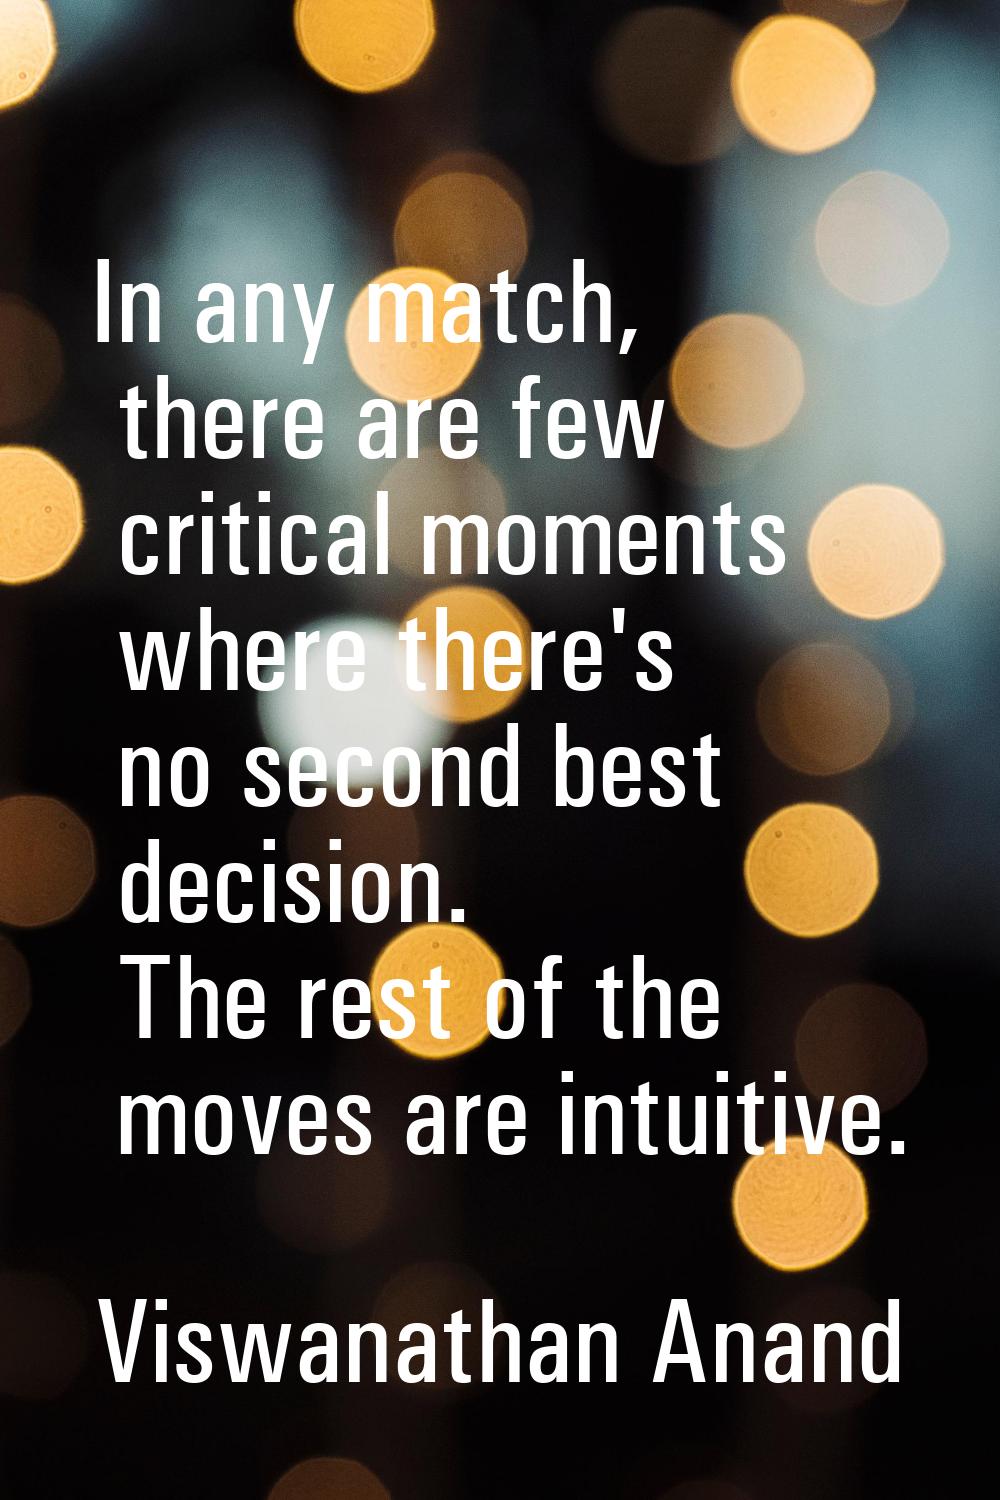 In any match, there are few critical moments where there's no second best decision. The rest of the